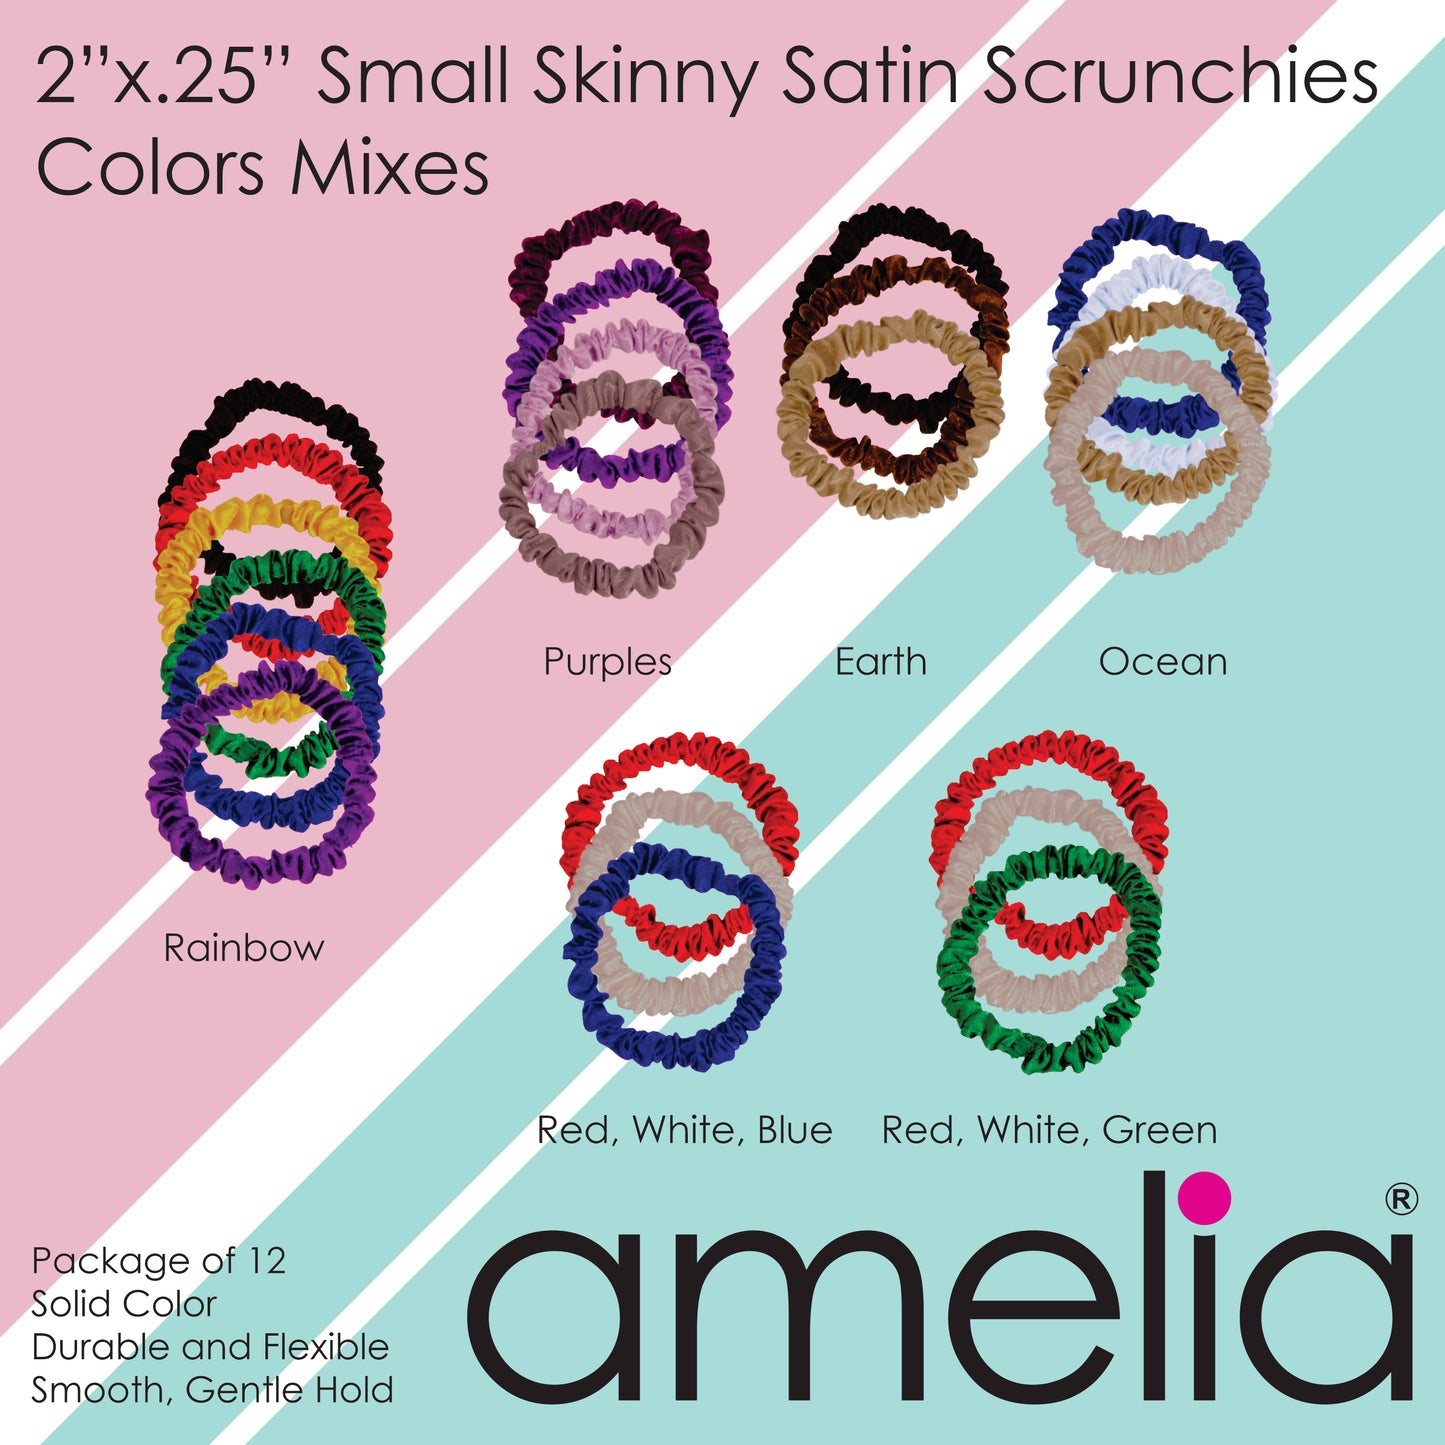 Amelia Beauty, Black Skinny Satin Scrunchies, 2in Diameter, Gentle and Strong Hold, No Snag, No Dents or Creases. 12 Pack